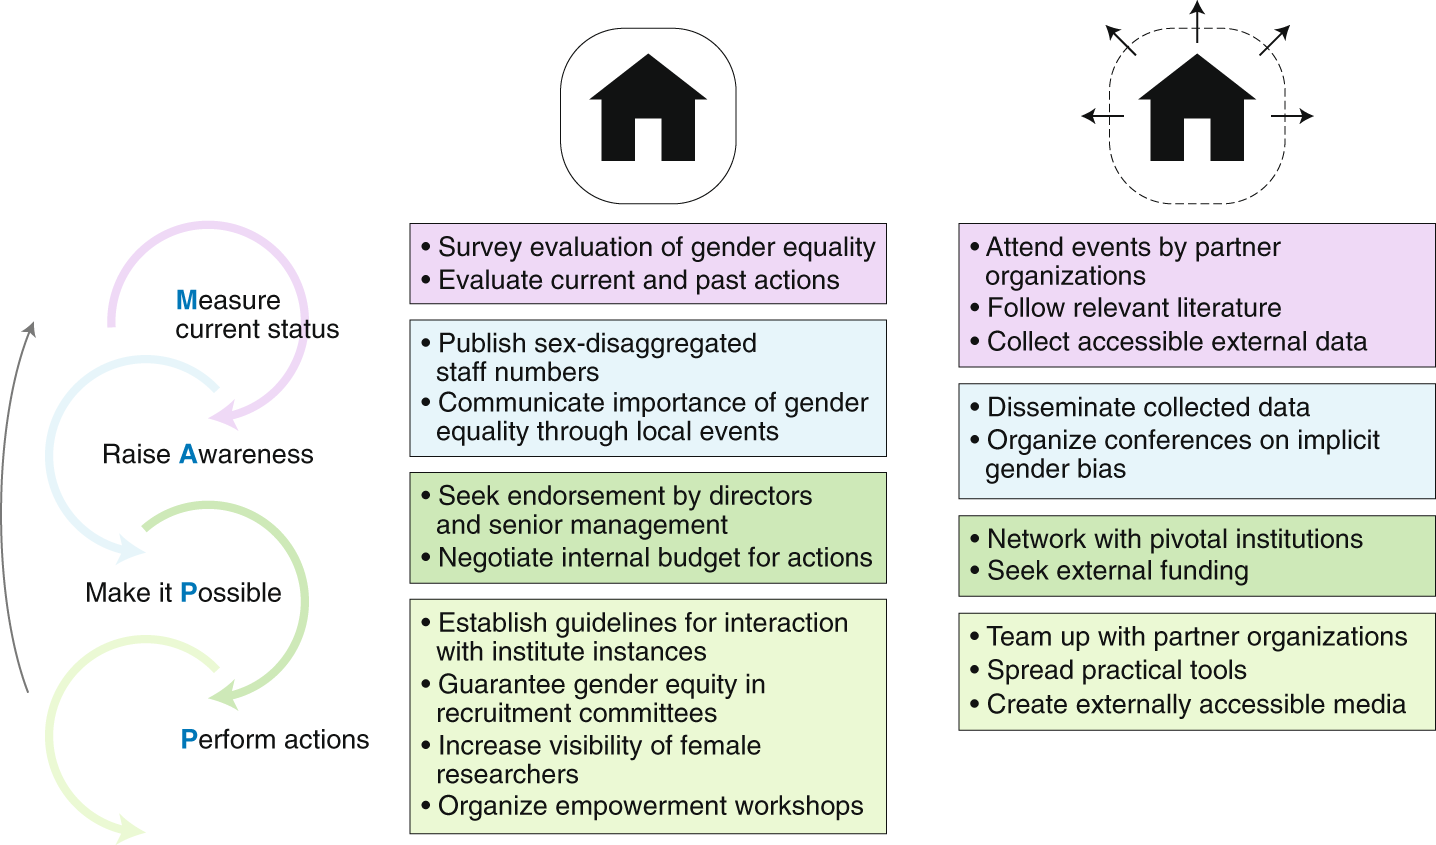 A neuroscientific to increase gender equality | Nature Human Behaviour